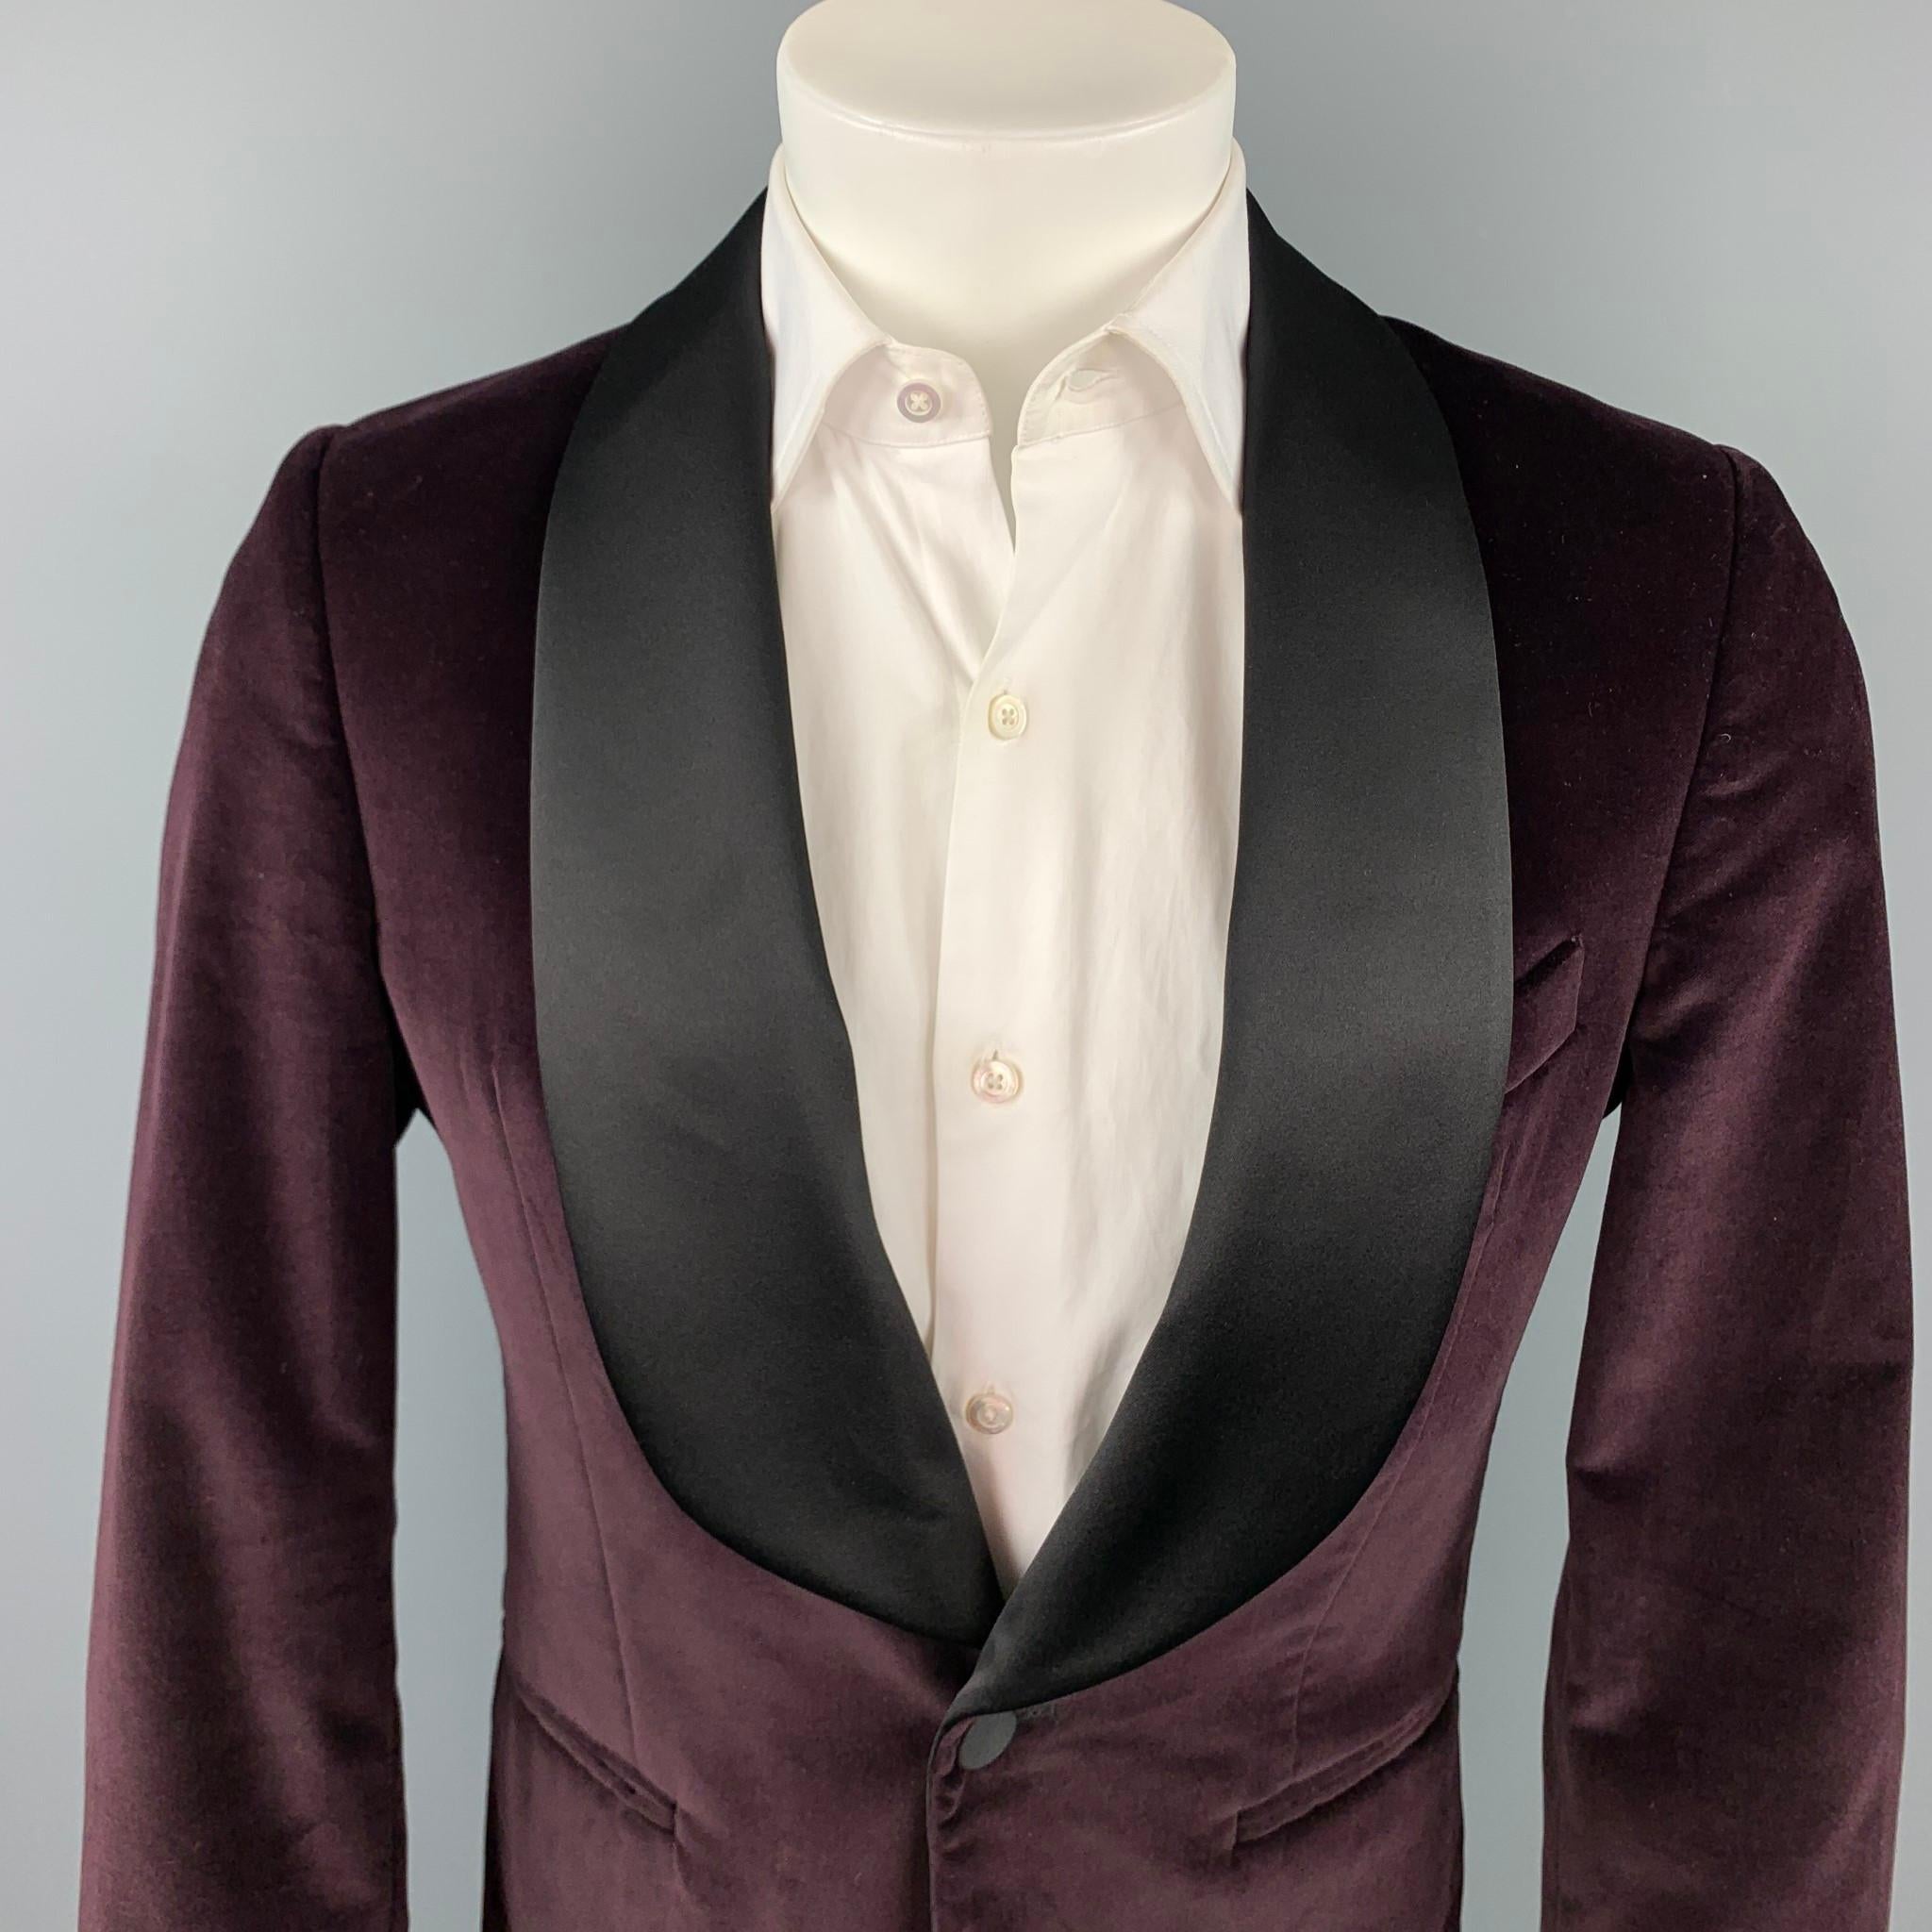 SALLE PRIVEE sport coat comes in a burgundy velvet with a full liner featuring a shawl collar, slit pockets, and a single button closure. Made in Italy.

Very Good Pre-Owned Condition.
Marked: 46

Measurements:

Shoulder: 17 in.
Chest: 38